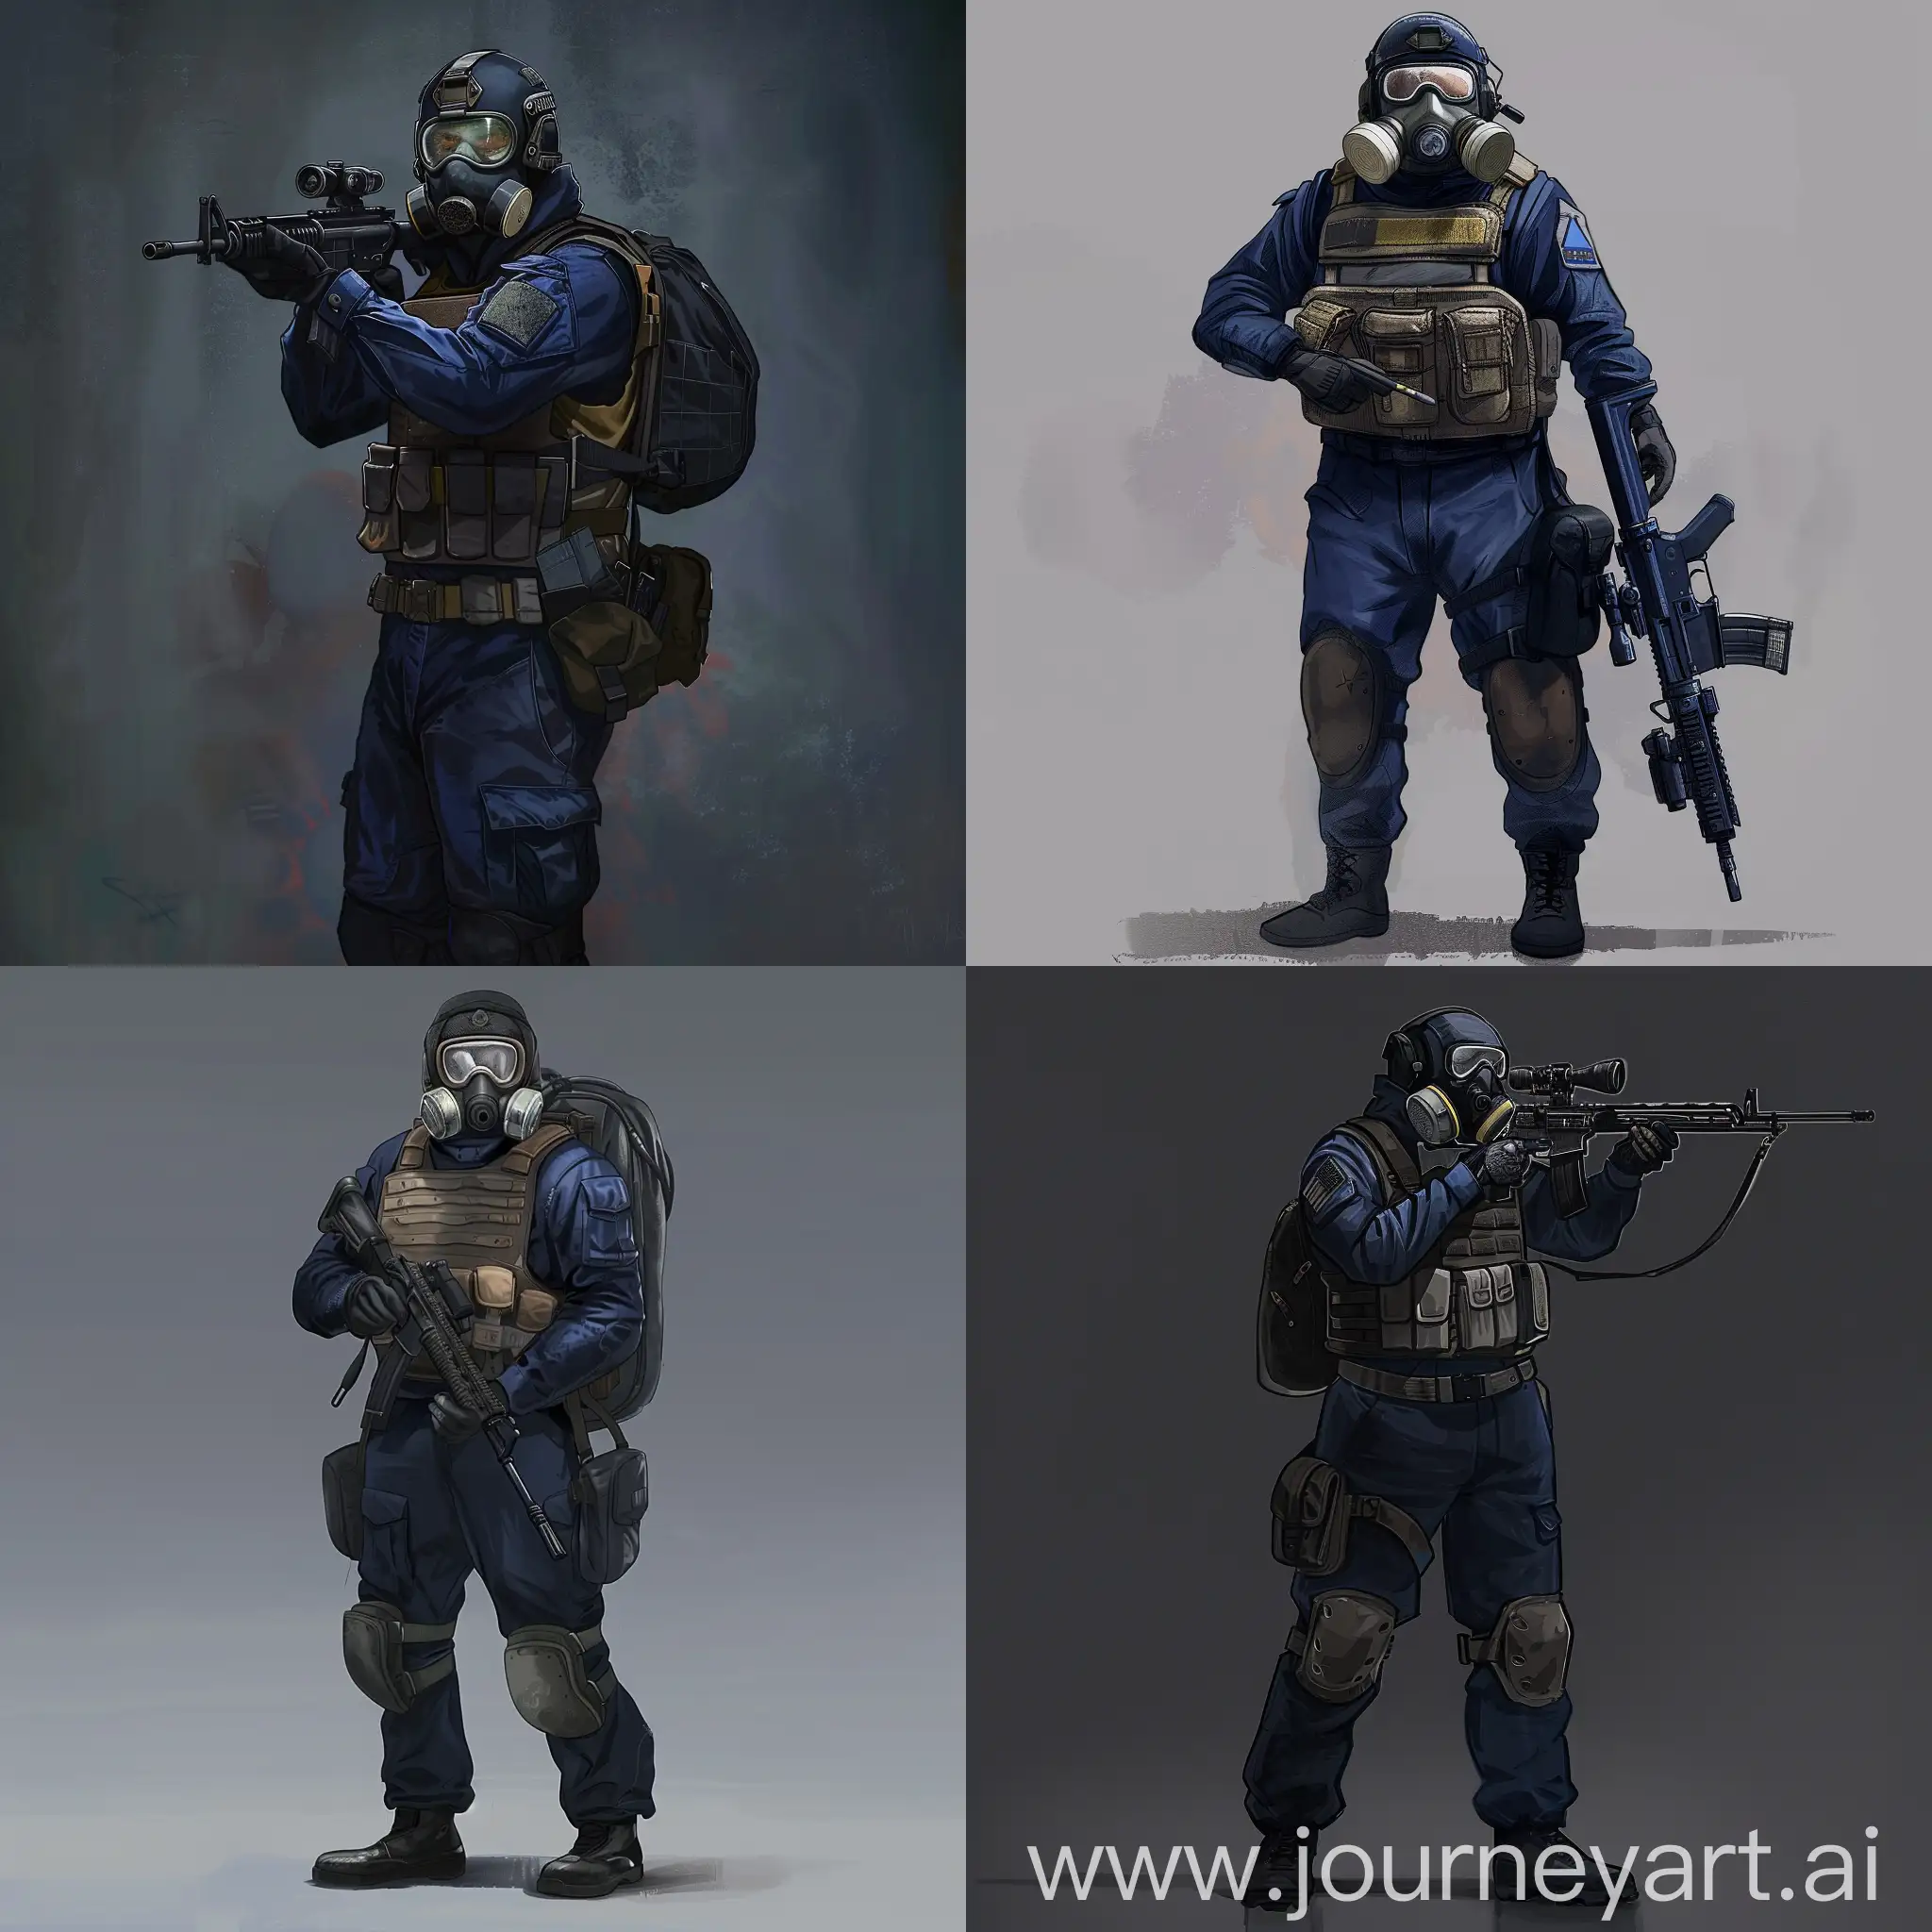 Mercenary from game stalker, concept art character, dark blue uniform, military vest, gasmask, sniper rifle in his hands, a small backpack on his back.